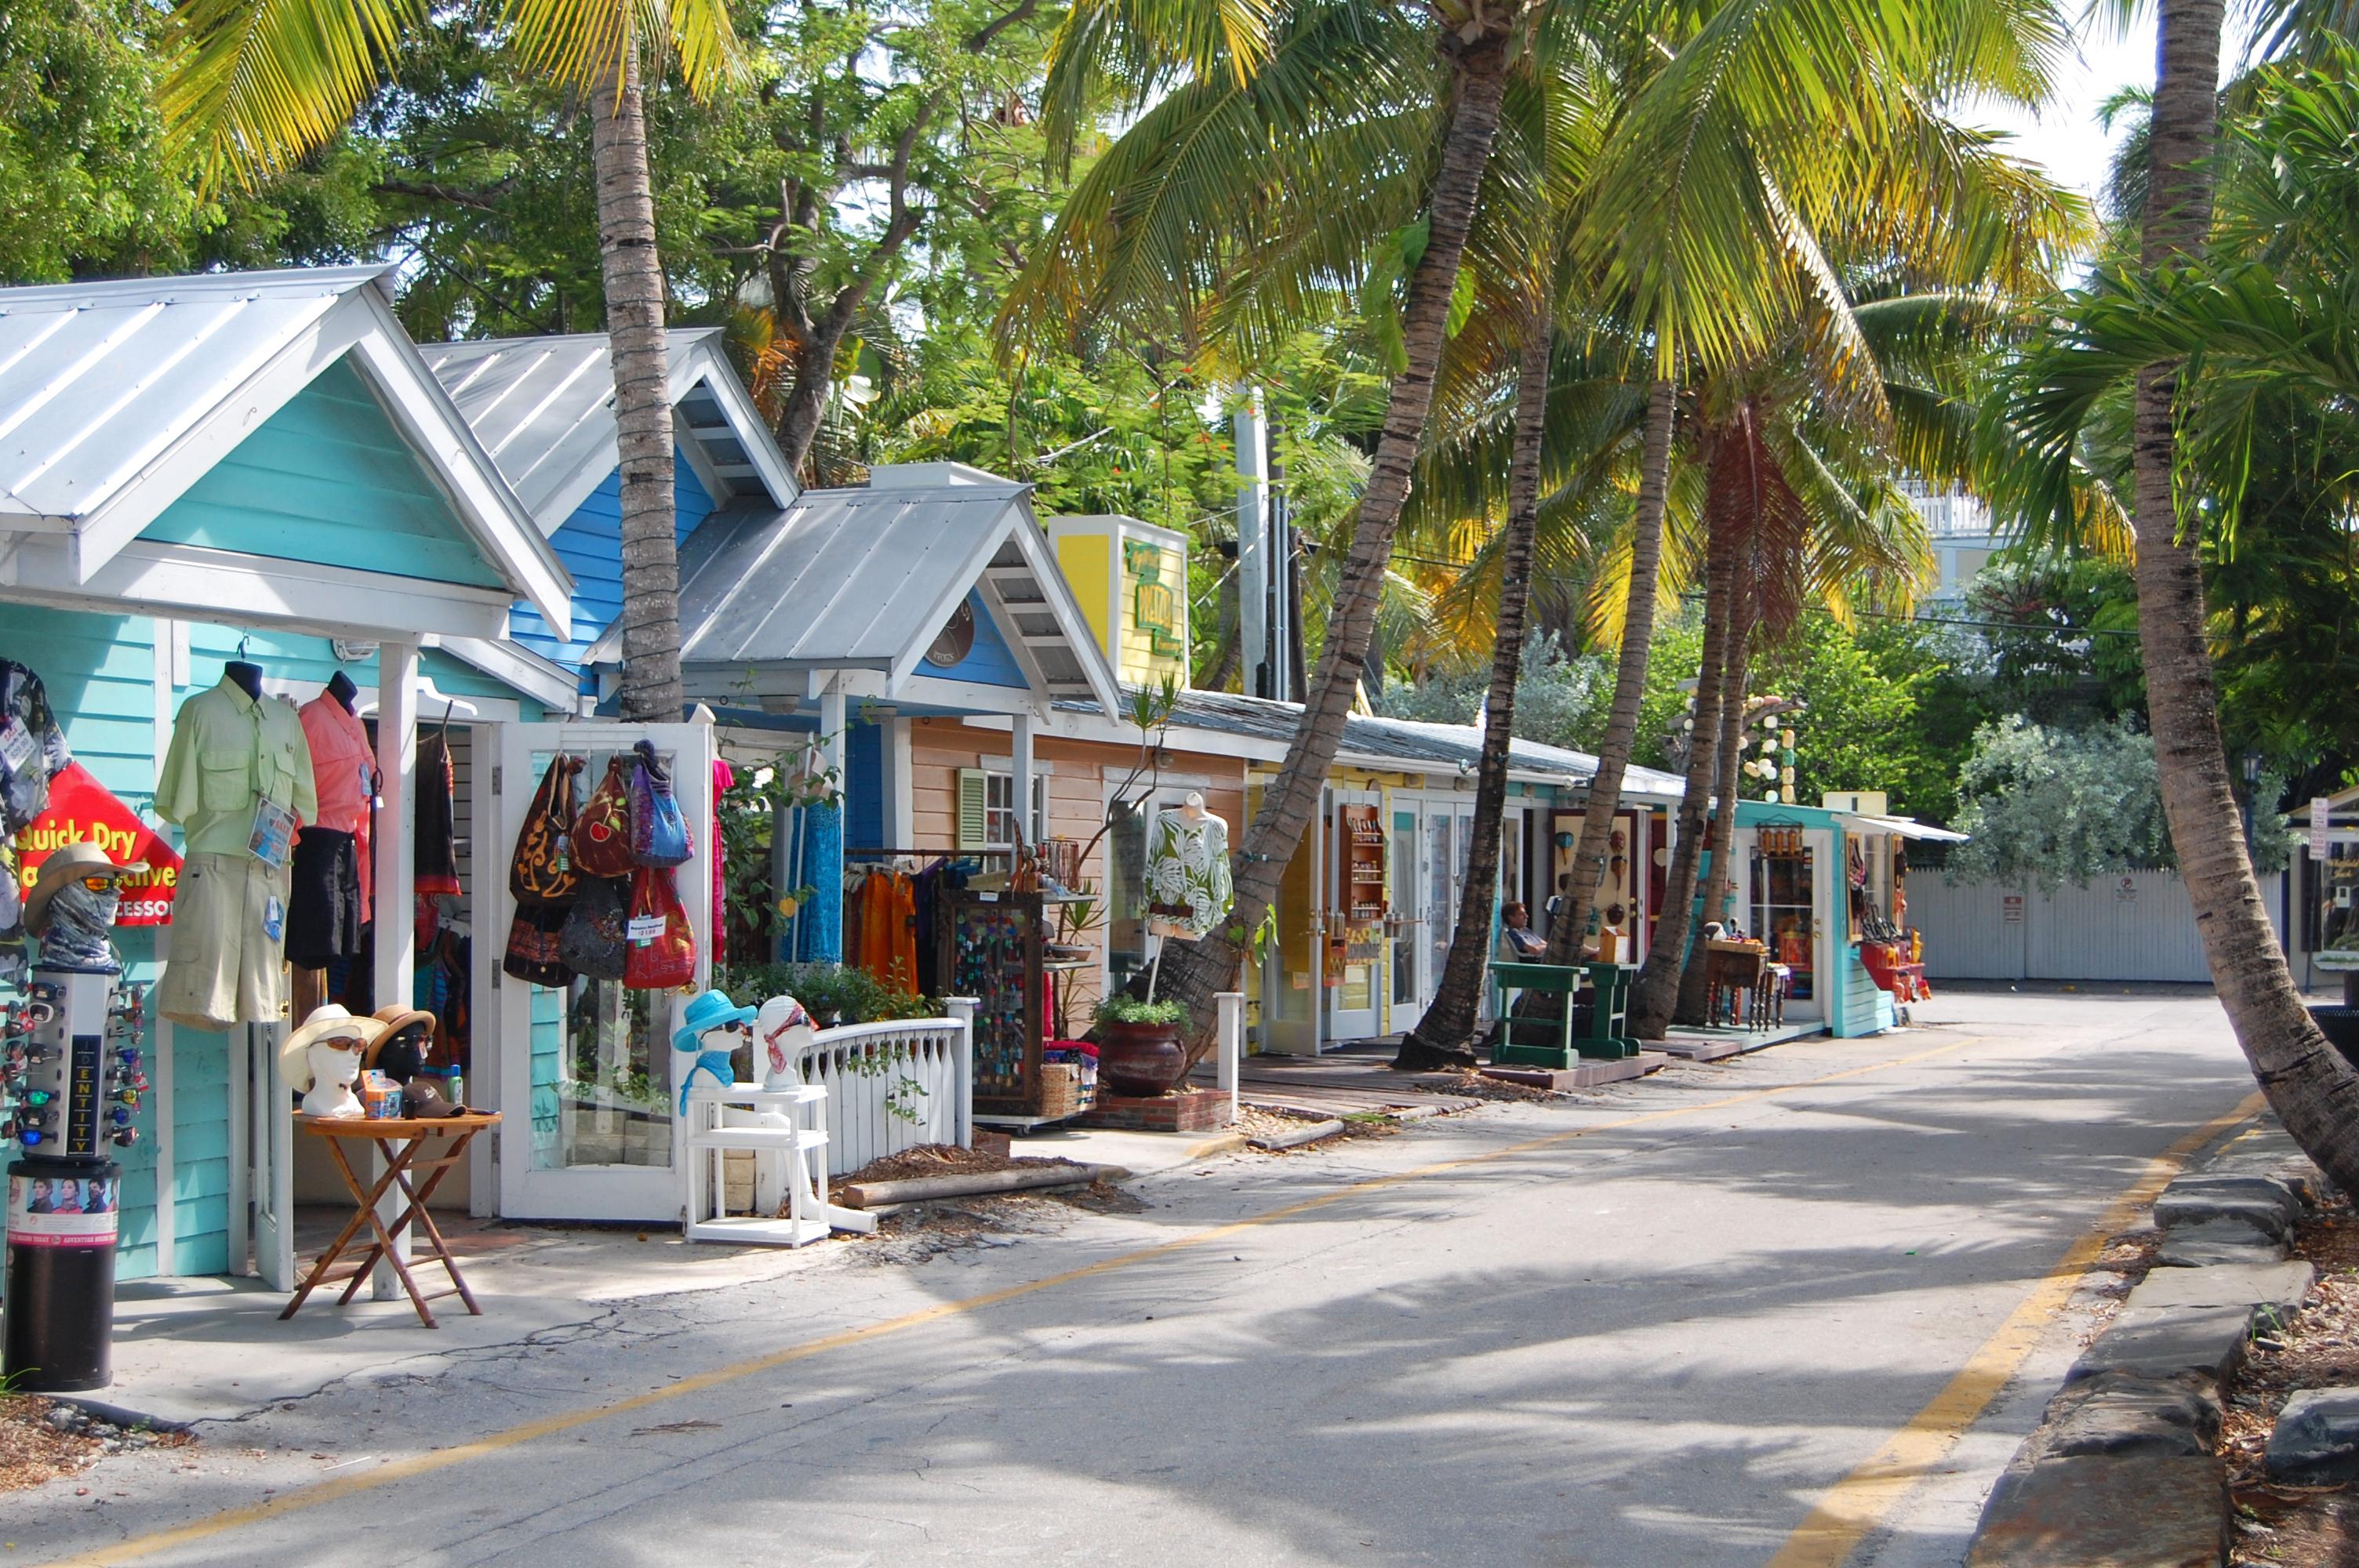 ykey west vactions